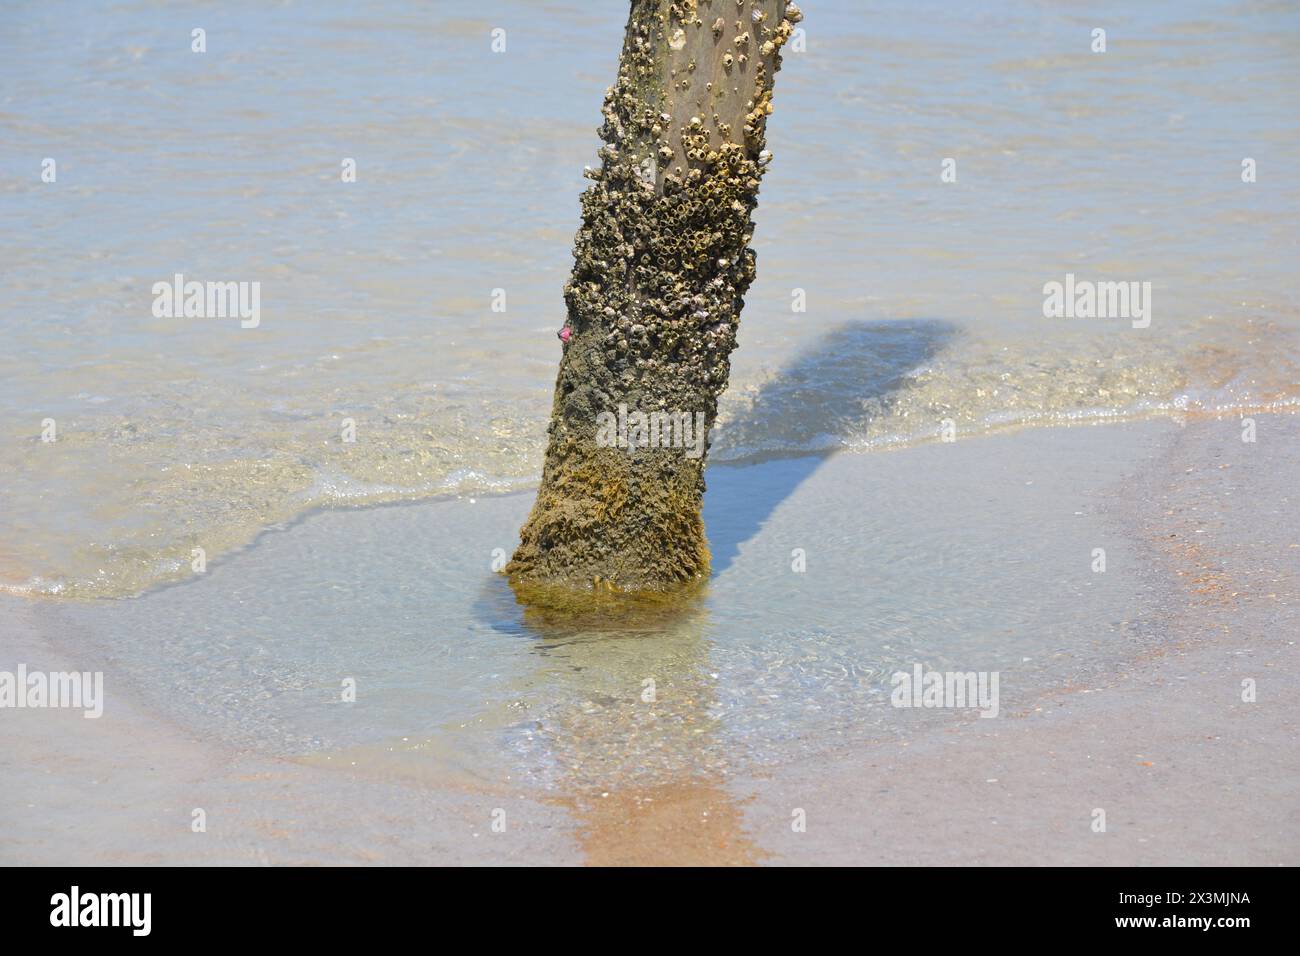 A close-up of an old wooden pole, covered with barnacles, featuring two titanium acorn barnacles, with water pooled at its base at Ponce Inlet beach. Stock Photo